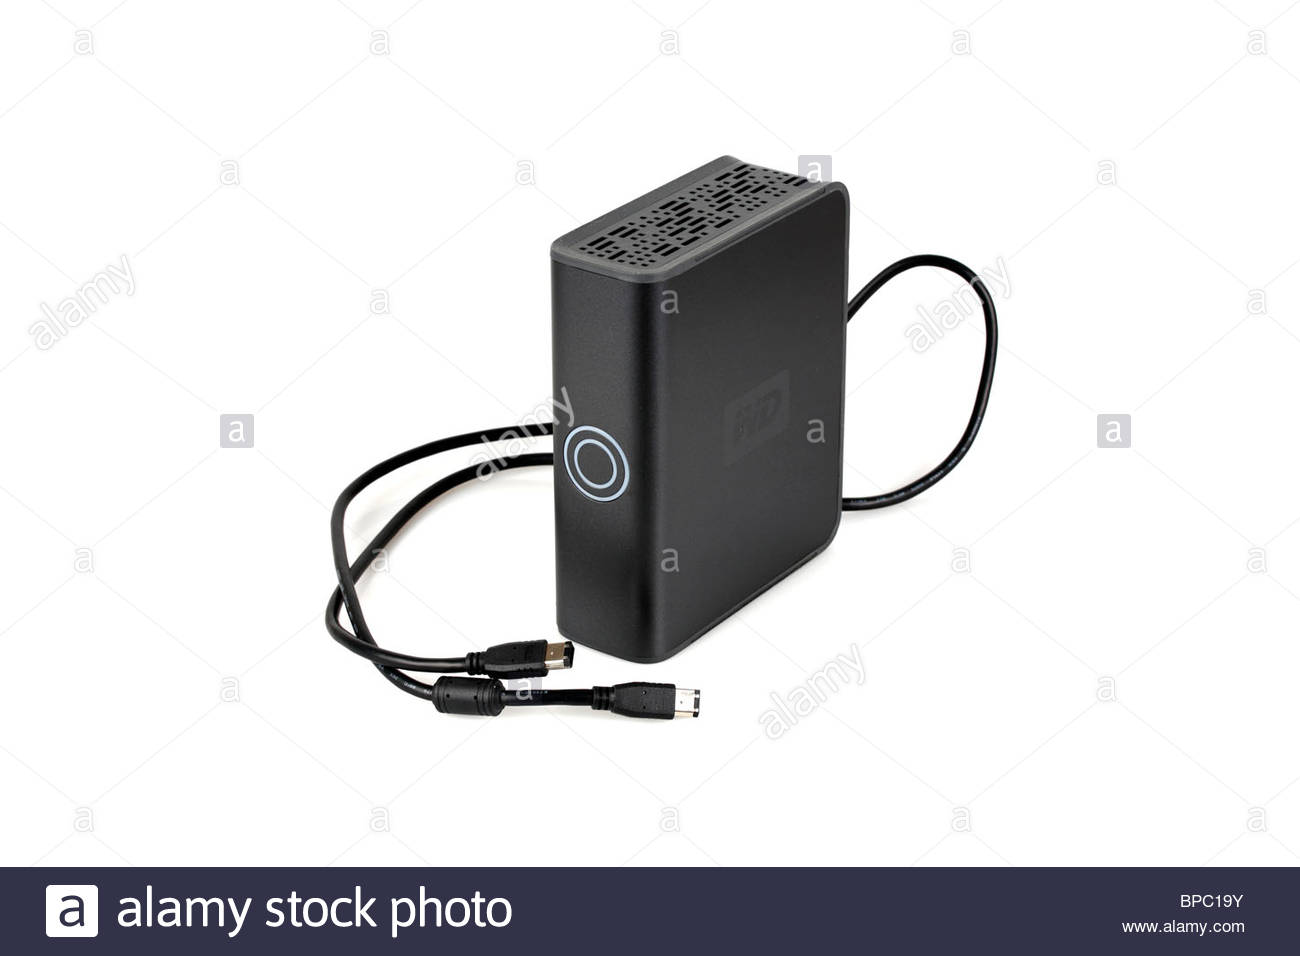 External hard drive with firewire cable Stock Photo